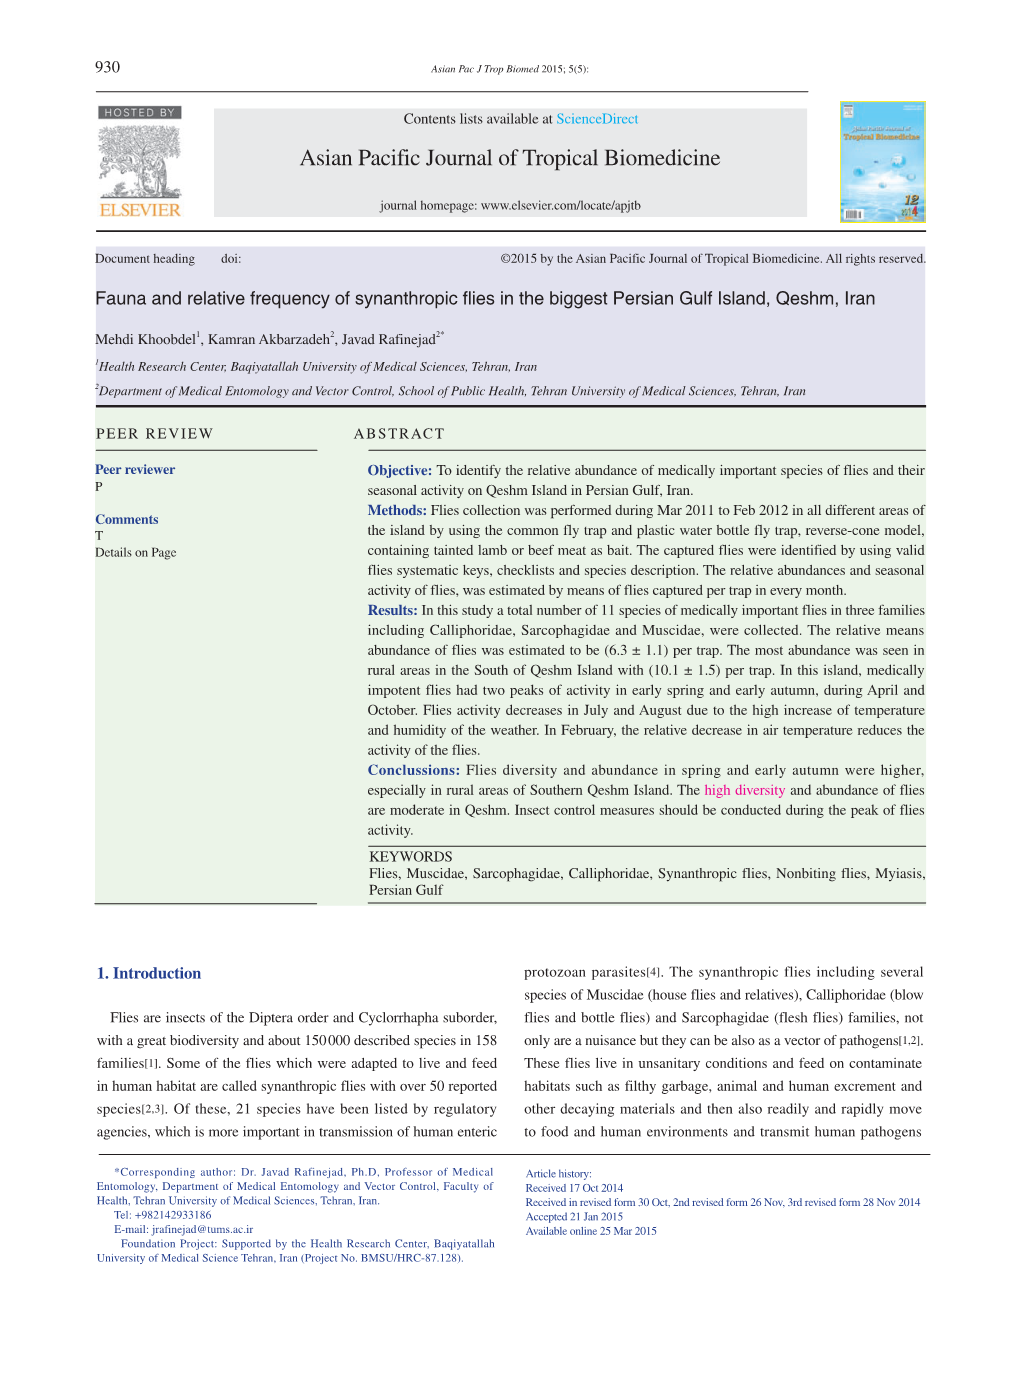 Asian Pacific Journal of Tropical Biomedicine